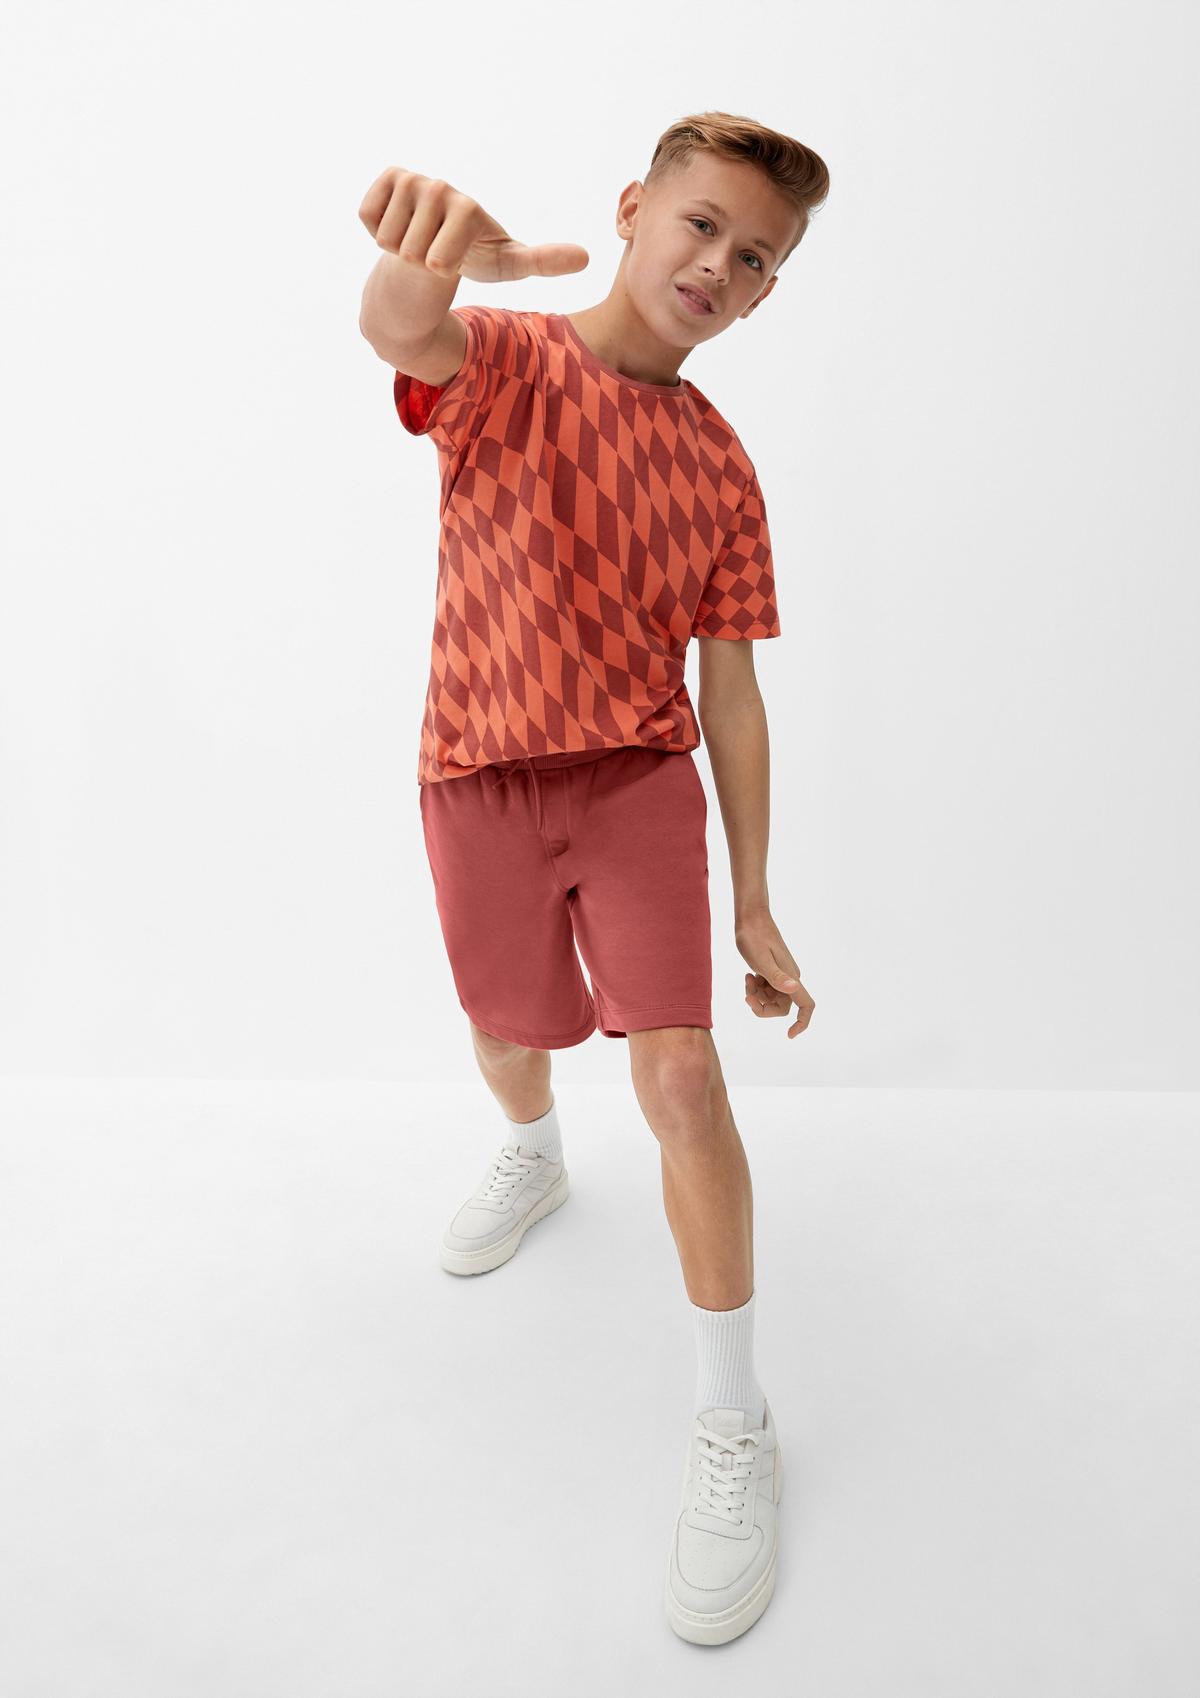 Find for teens Bermuda boys shorts online and